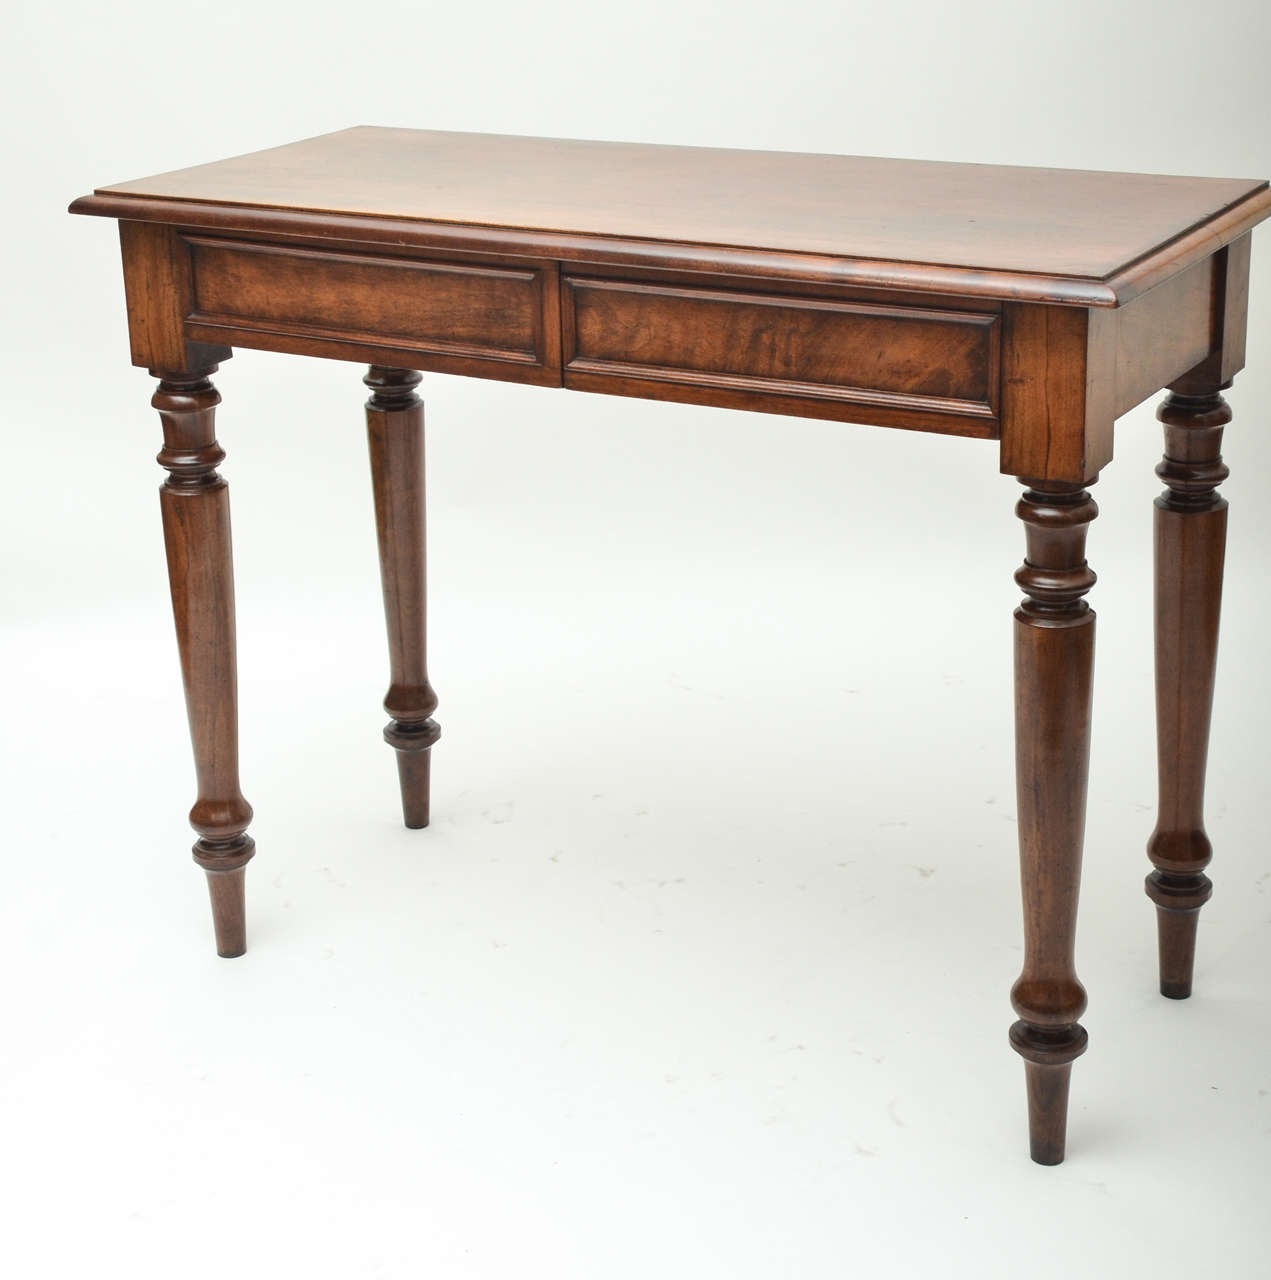 A 19th century English mahogany serving table with two fitted frieze drawers, and turned legs.